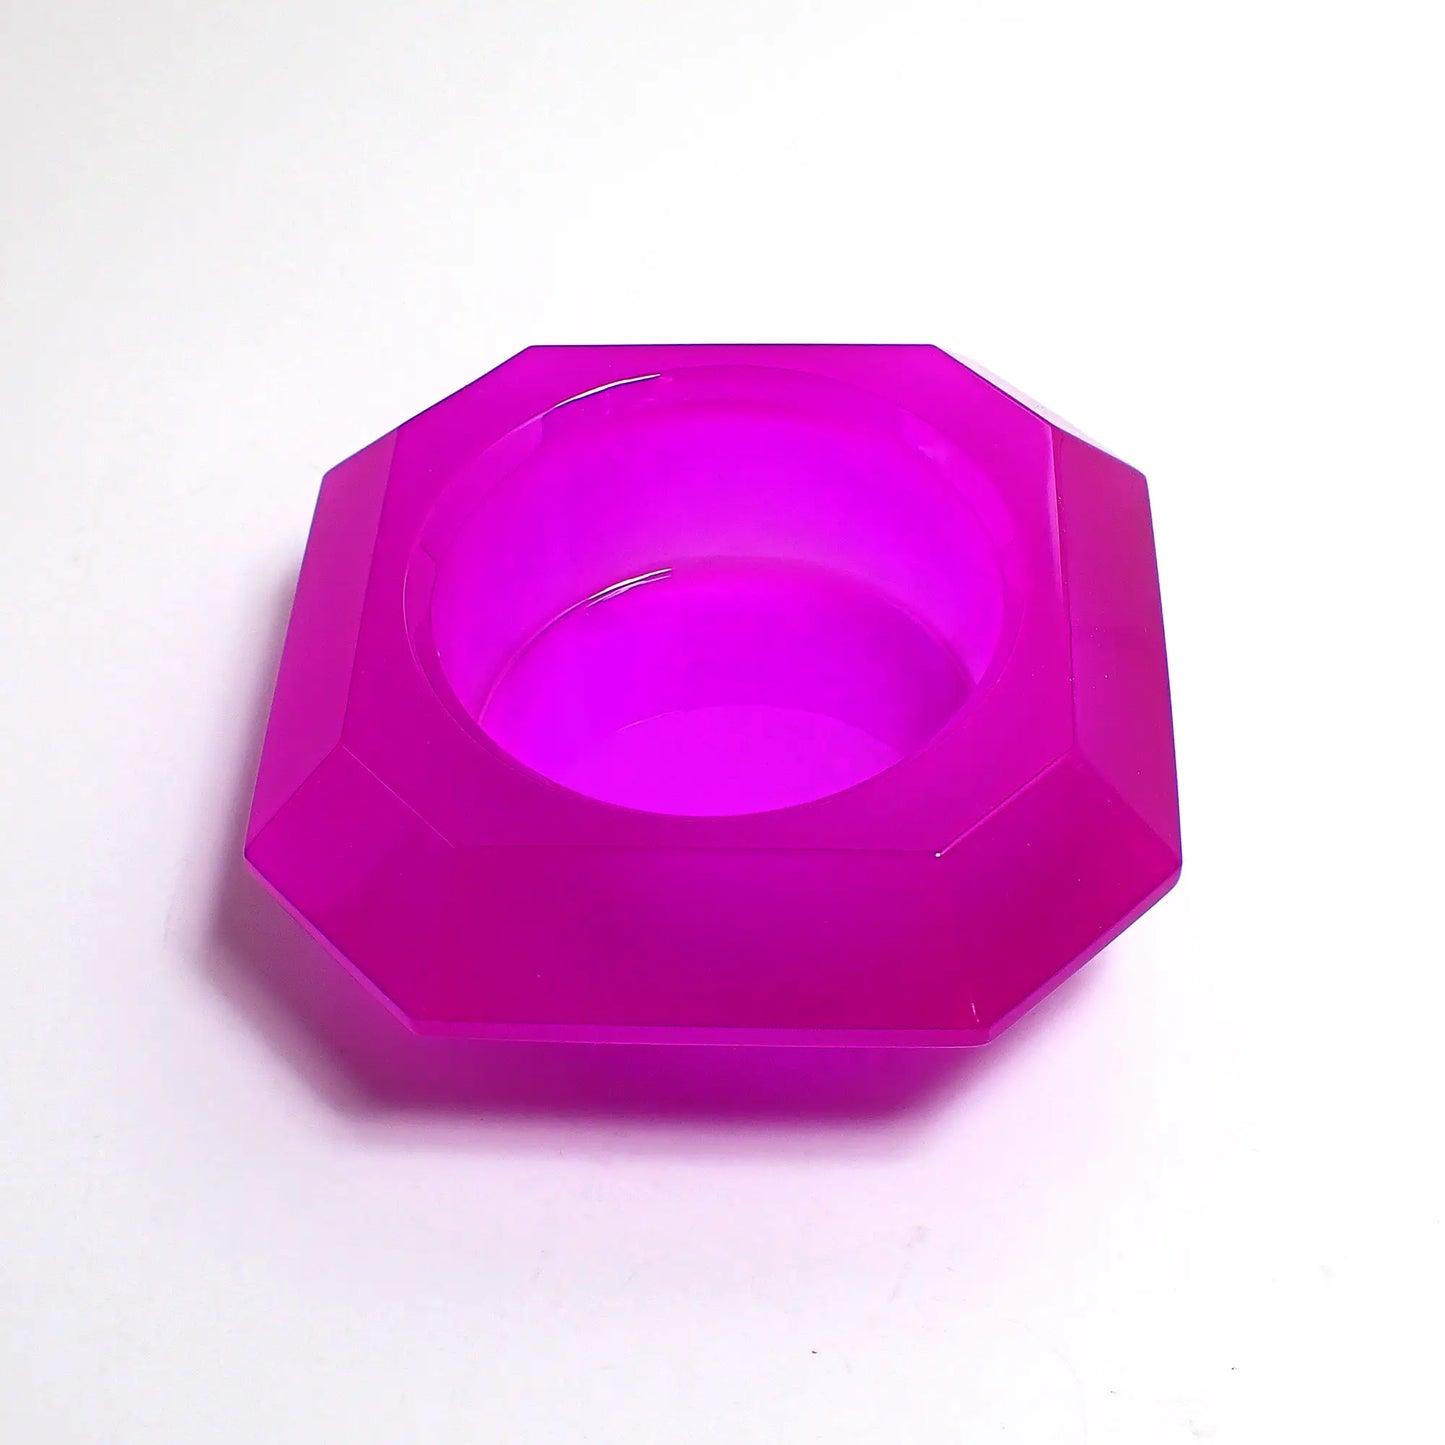 Small Handmade Faceted Octagon Neon Purple Resin Decorative Pot